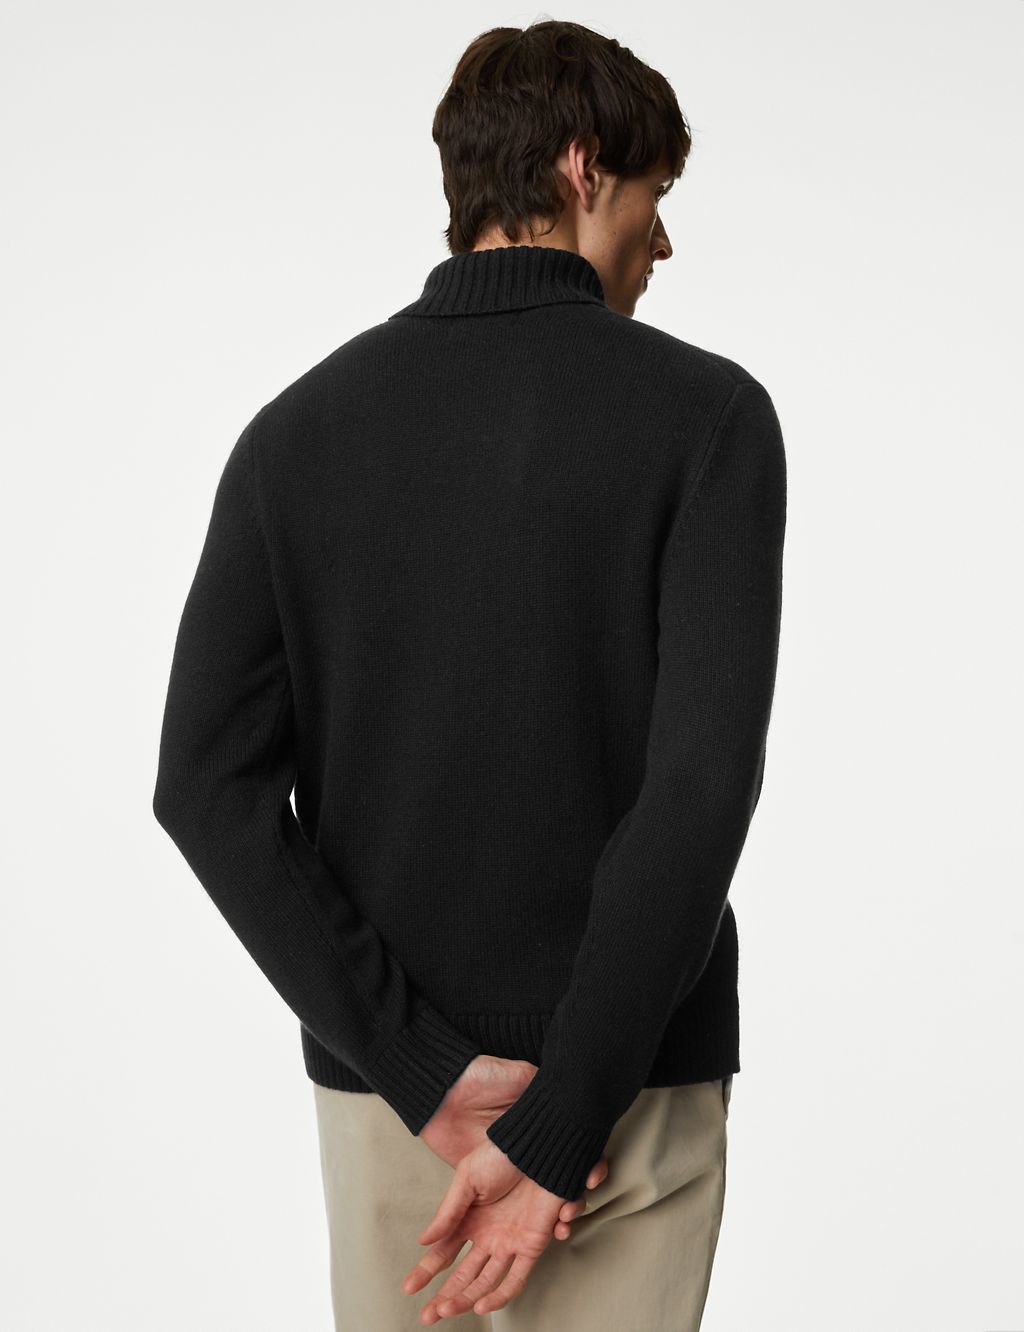 Extra Fine Merino Wool Jumper with Cashmere | Autograph | M&S